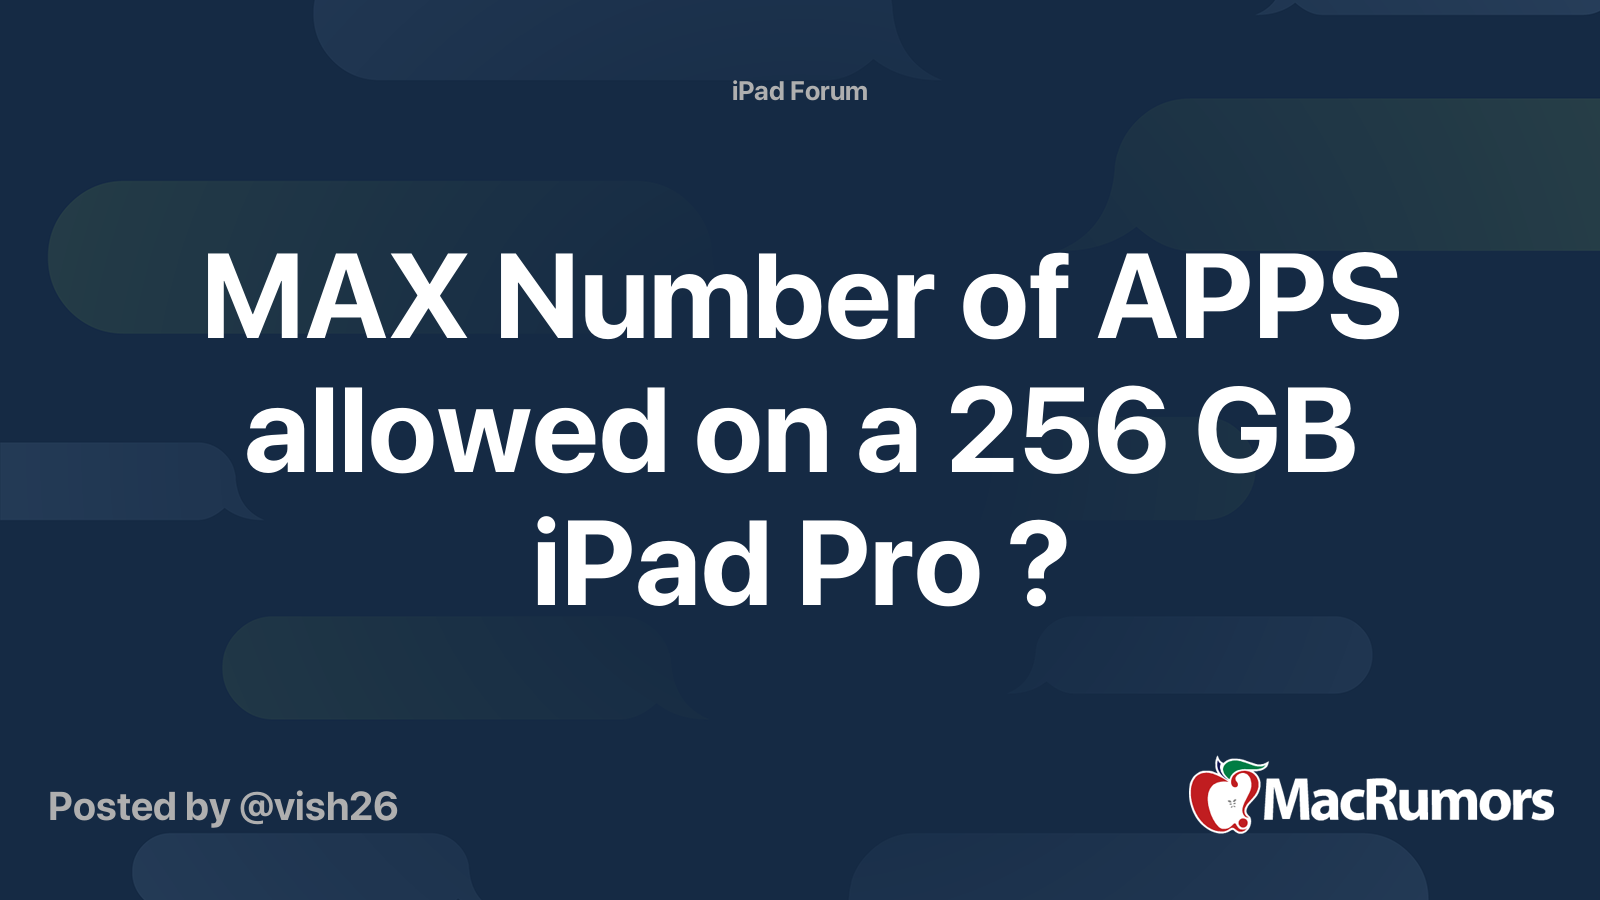 max-number-of-apps-allowed-on-a-256-gb-ipad-pro-macrumors-forums